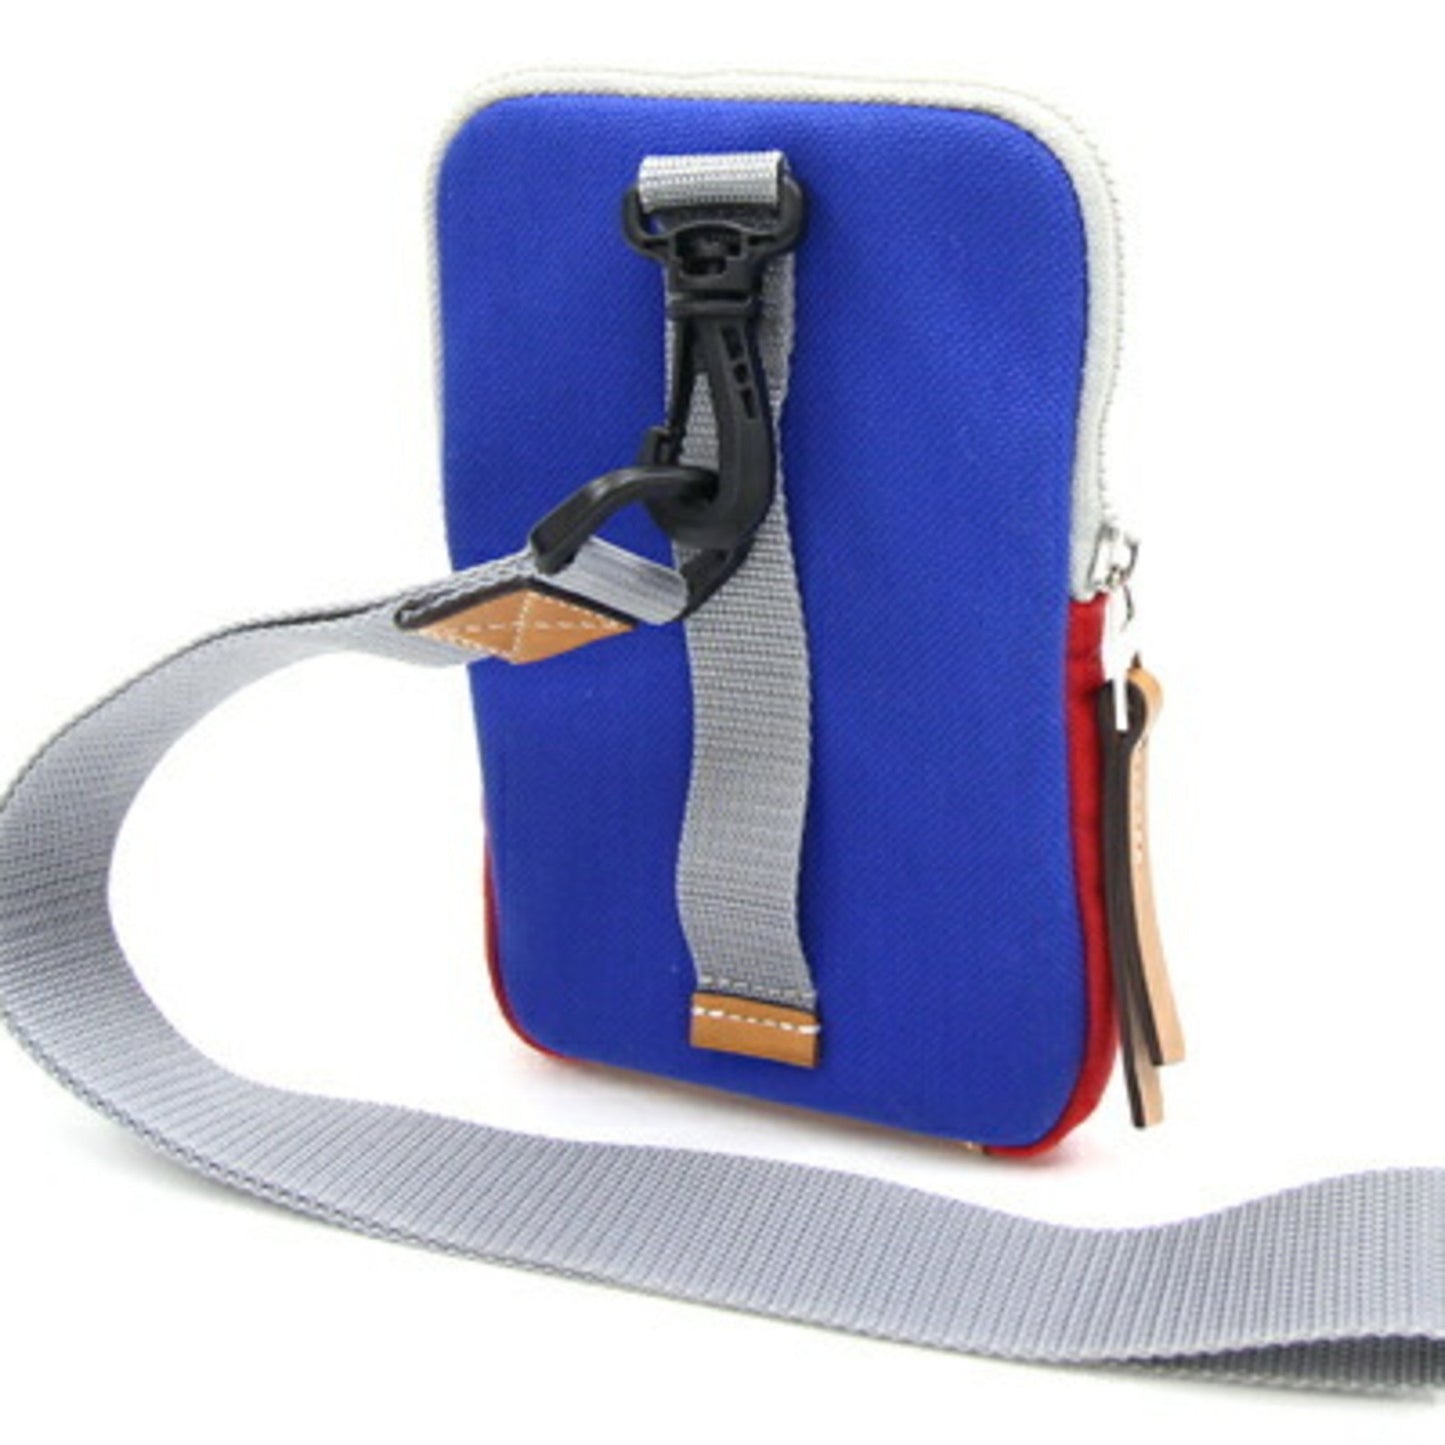 Loewe Unisex Blue Canvas Pouch with Red Accents in Blue